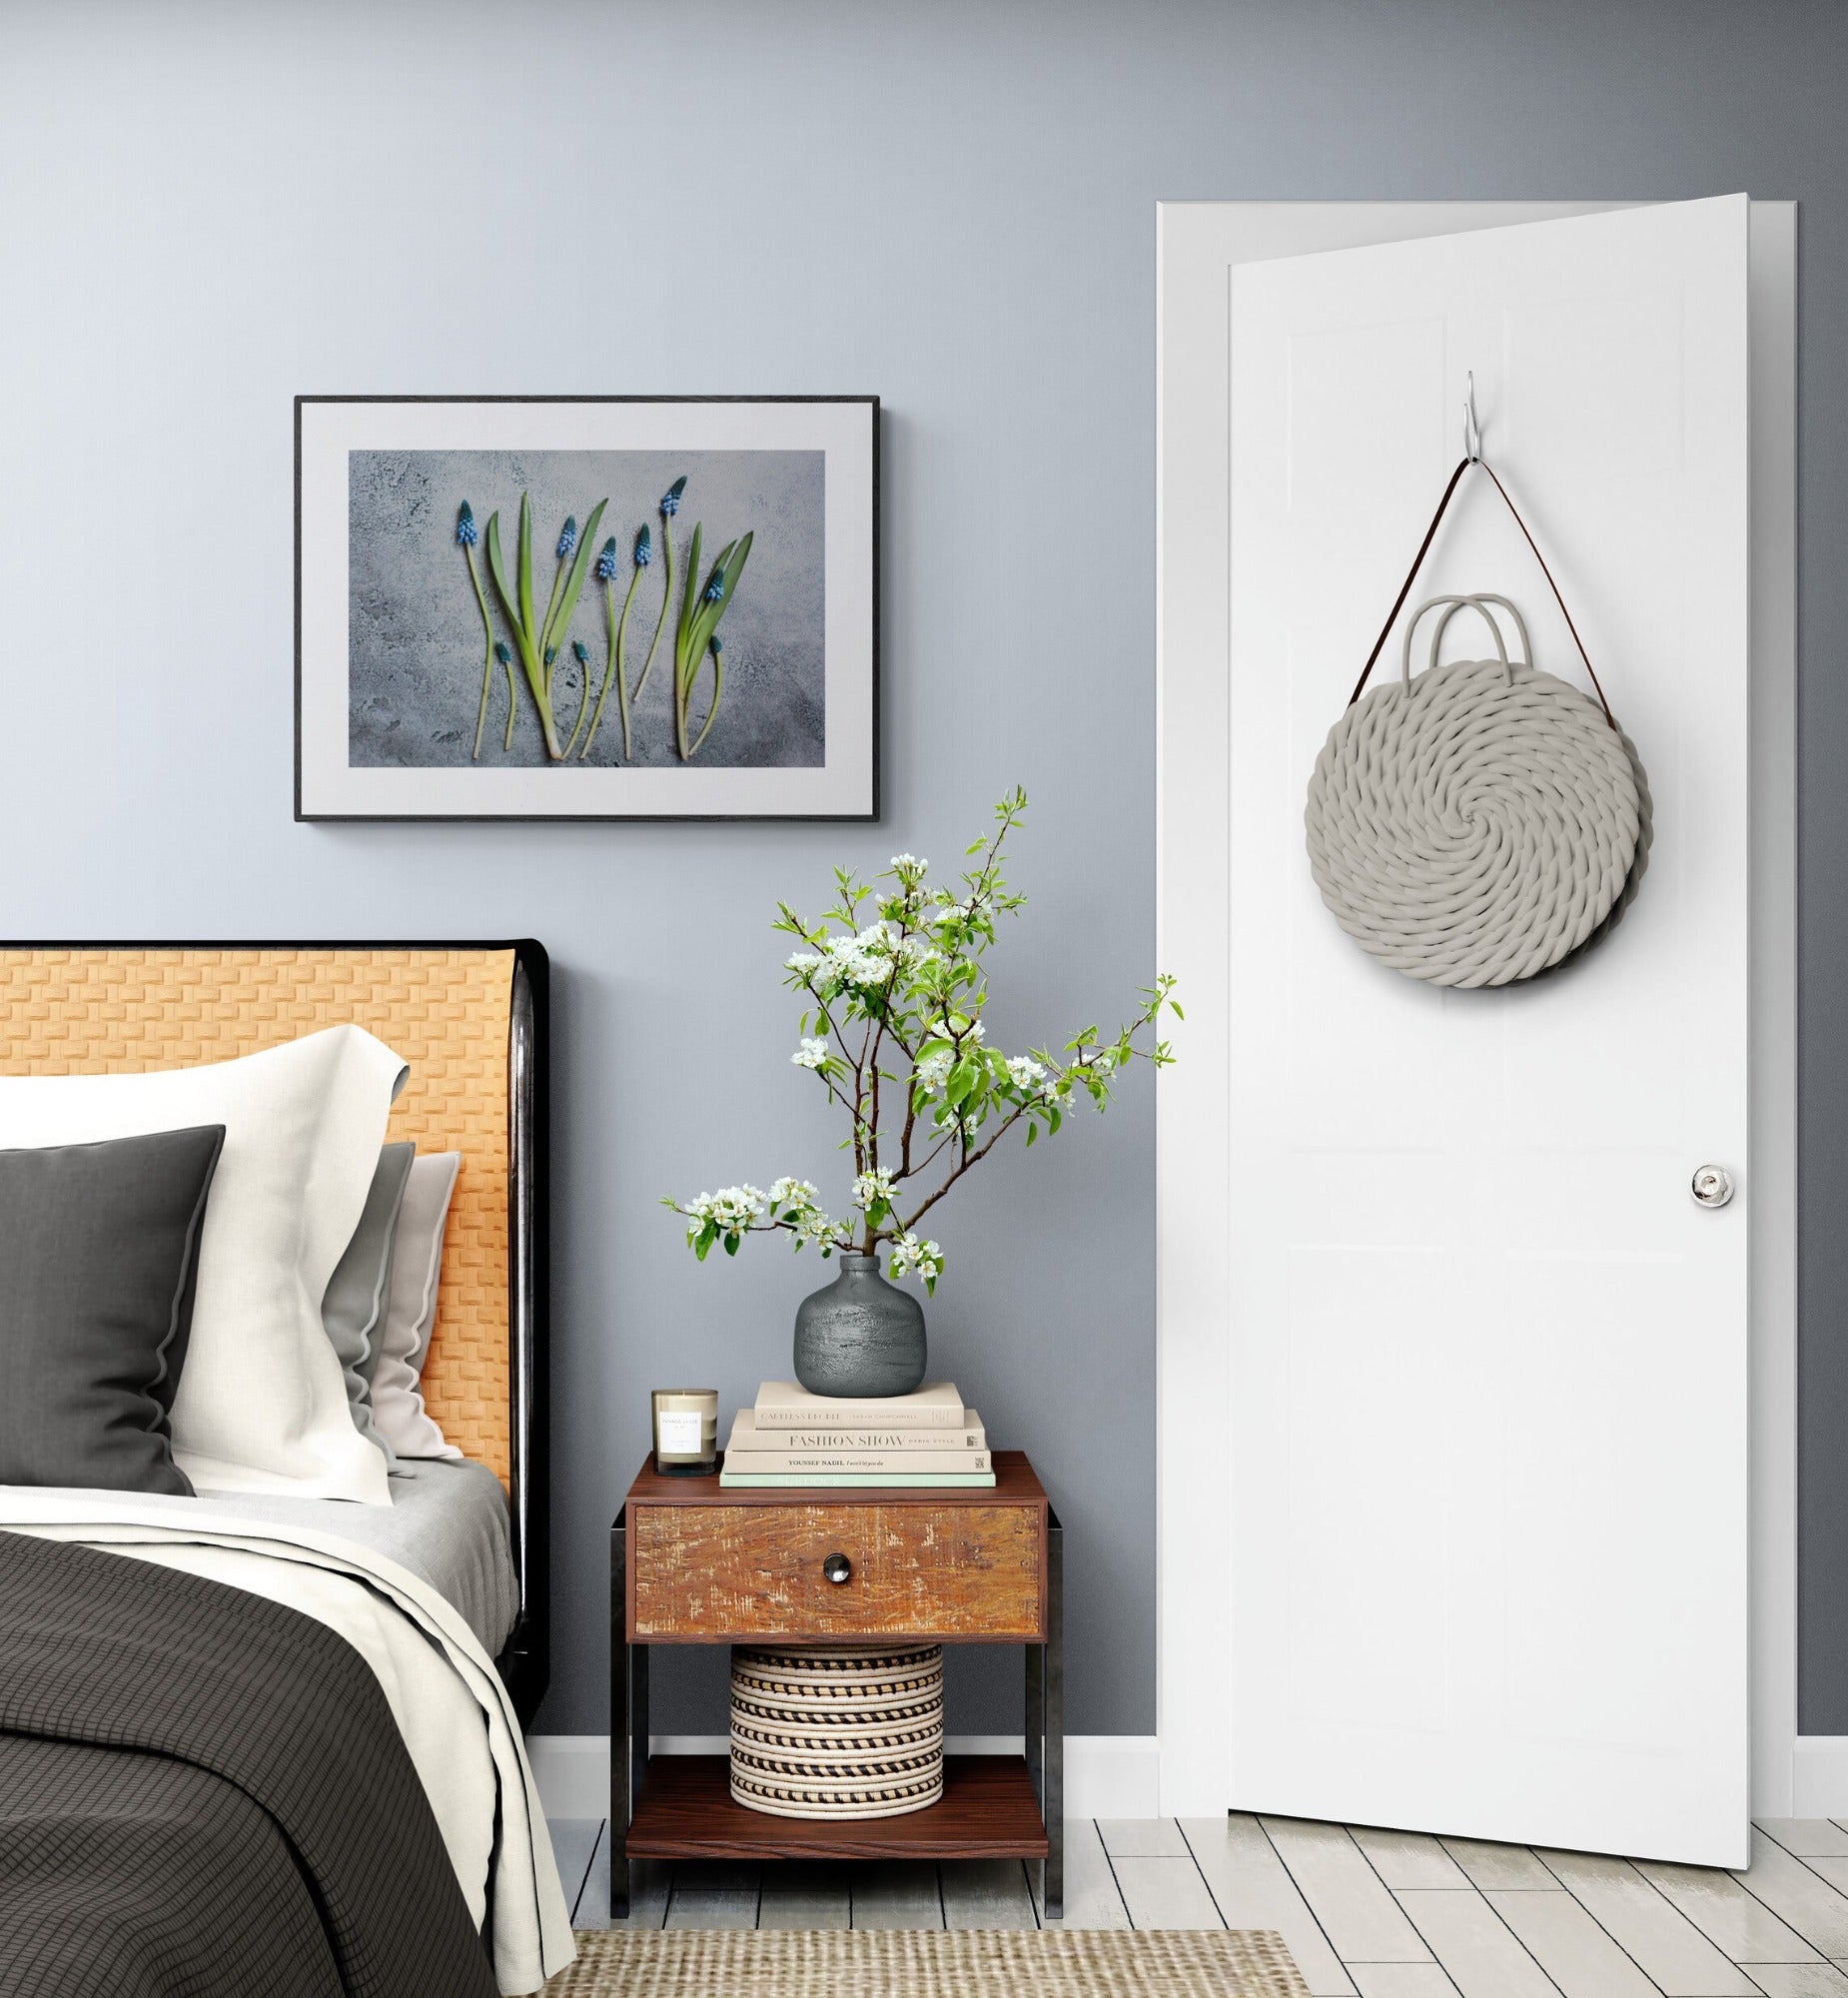 Blue flowers photograph as wall art in a comfy bedroom